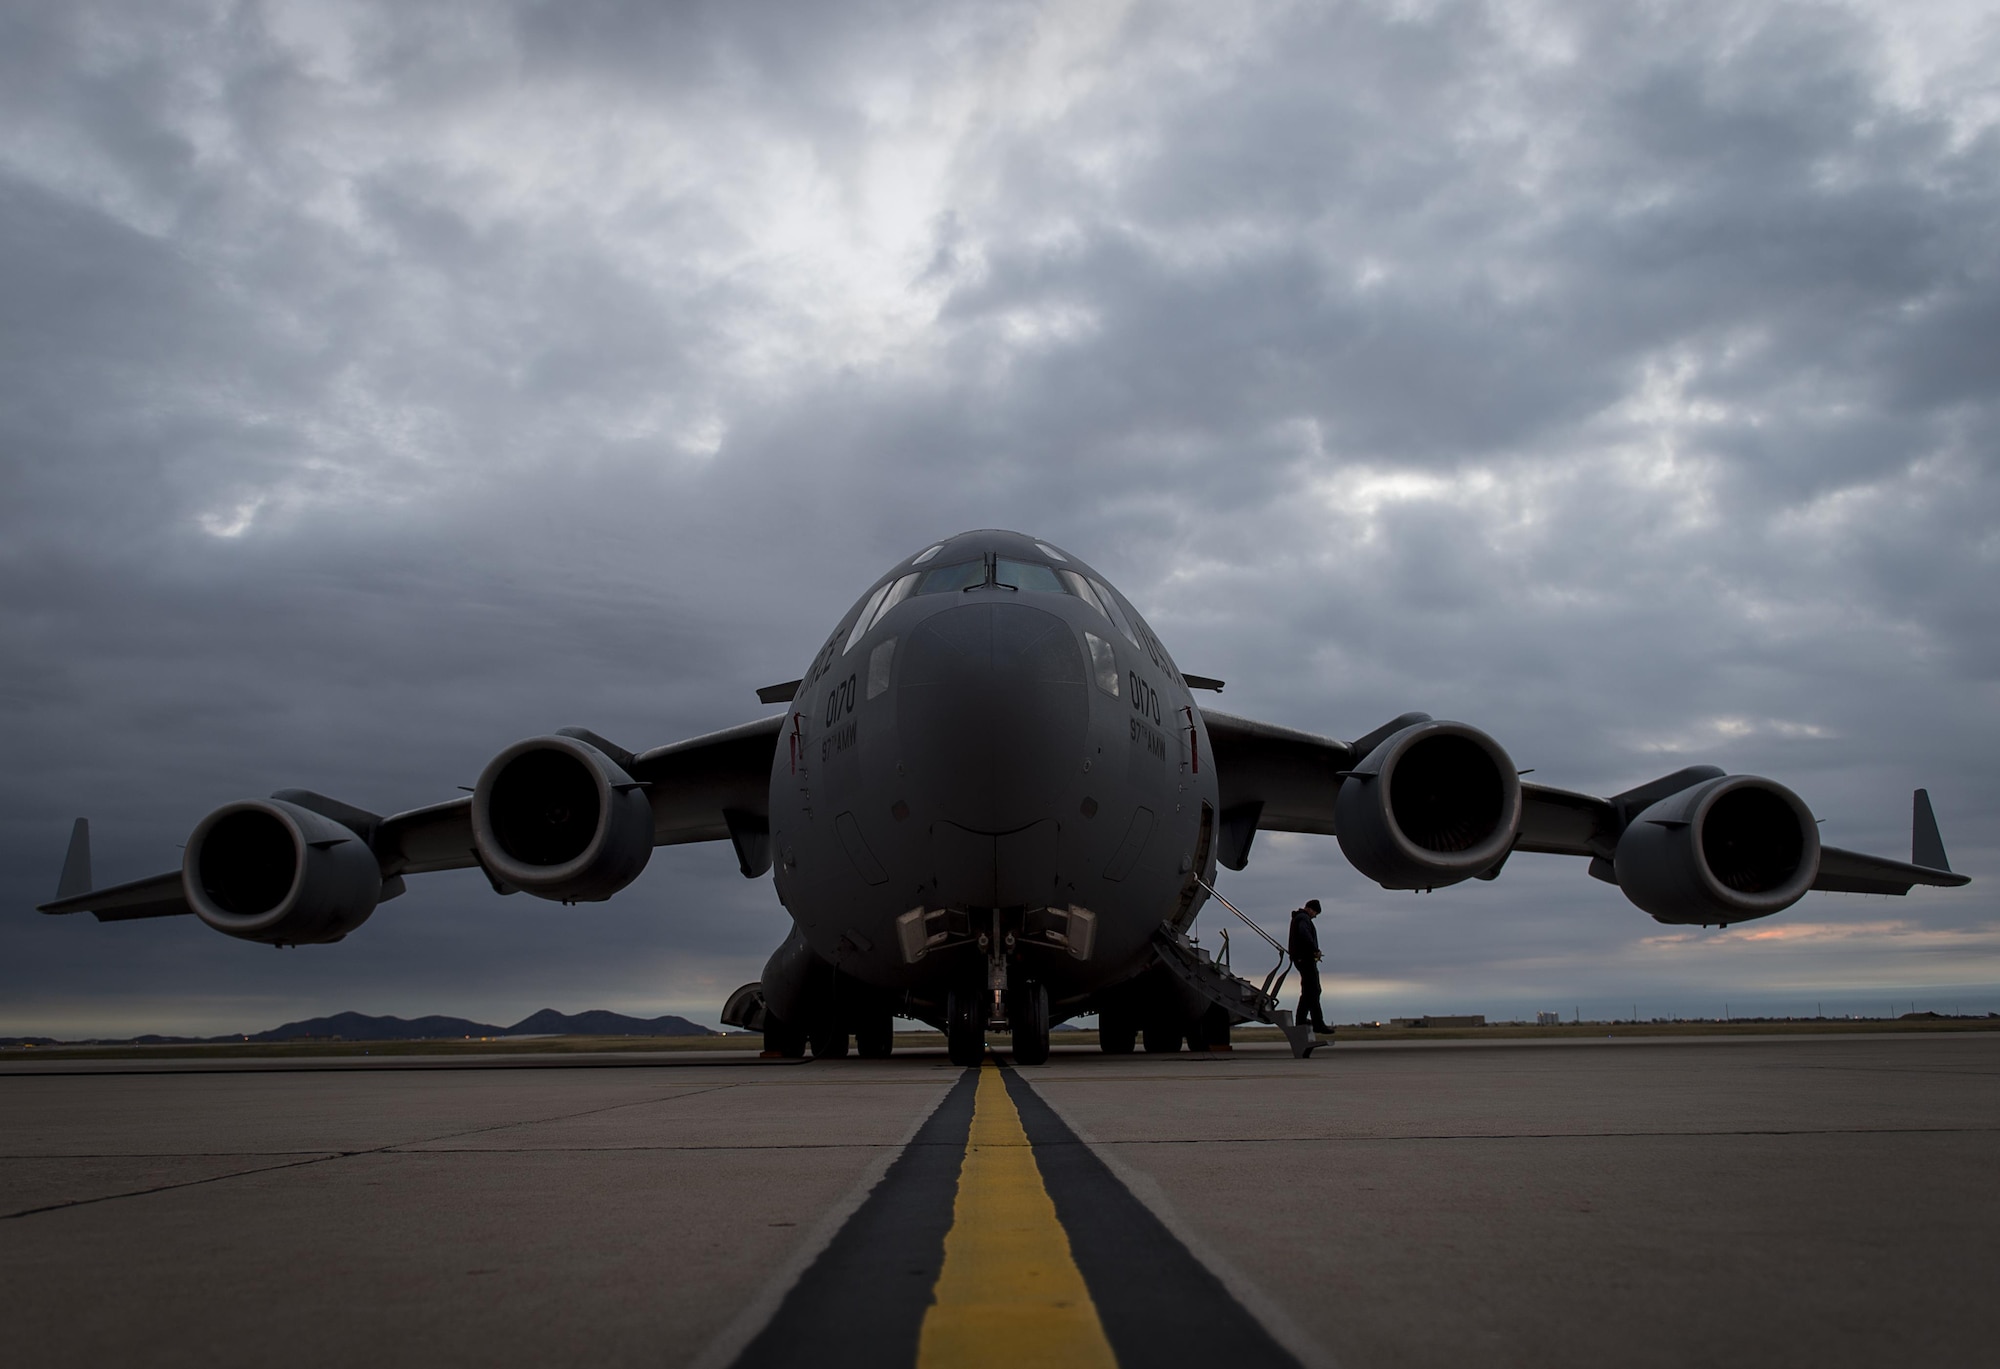 An A-Team member with the 97th Maintenance Group exits a C-17 Globemaster III during the Altus Quarterly Exercise (ALTEX), Nov. 16, 2017 at Altus Air Force Base, Okla.